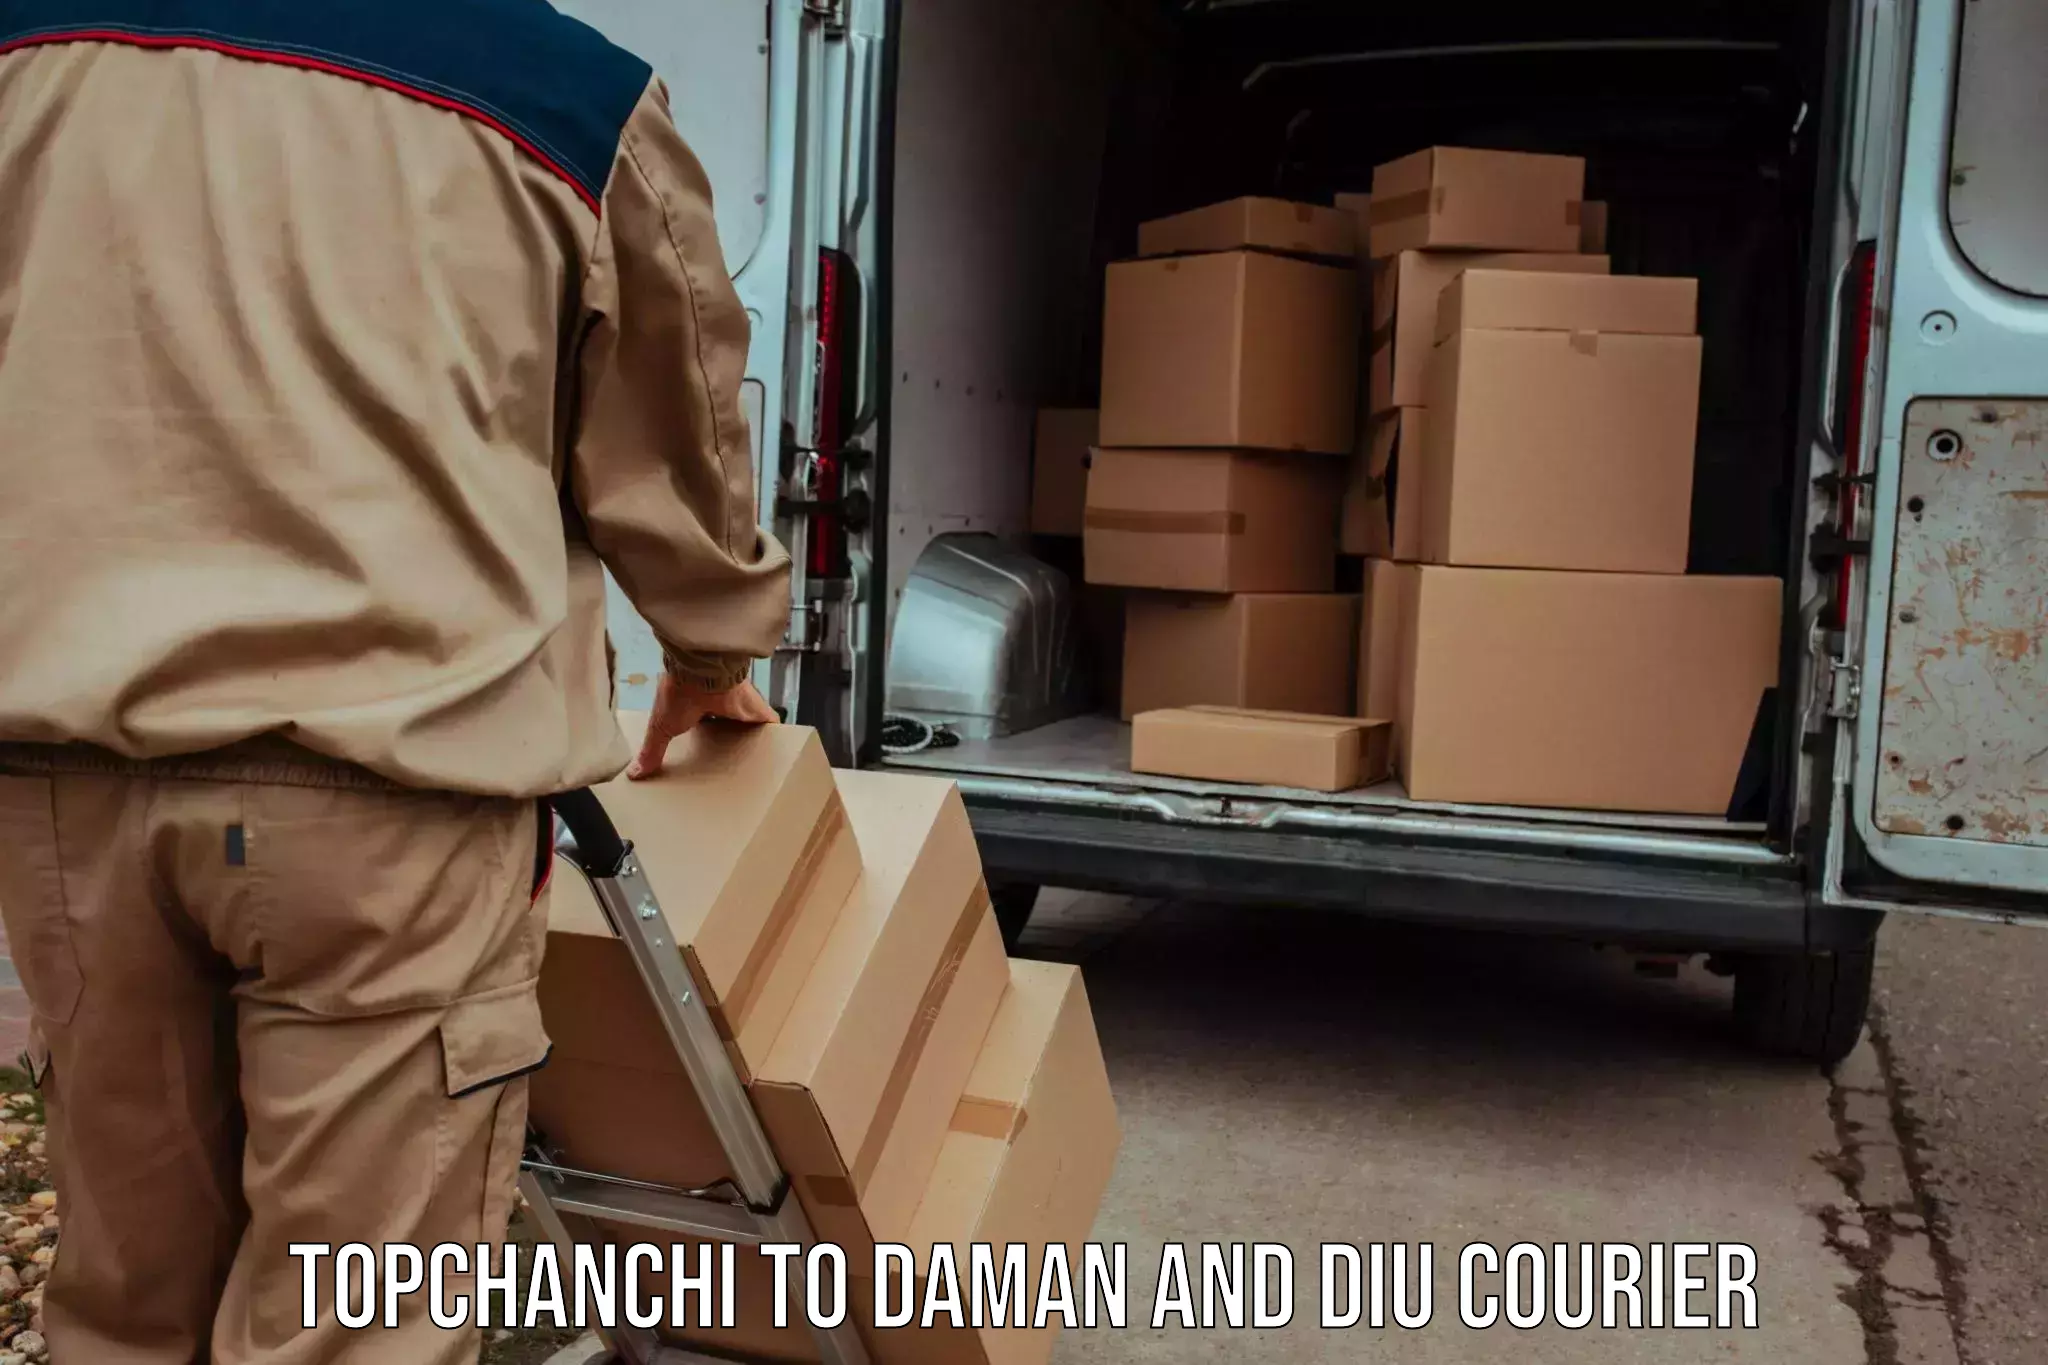 State-of-the-art courier technology Topchanchi to Diu